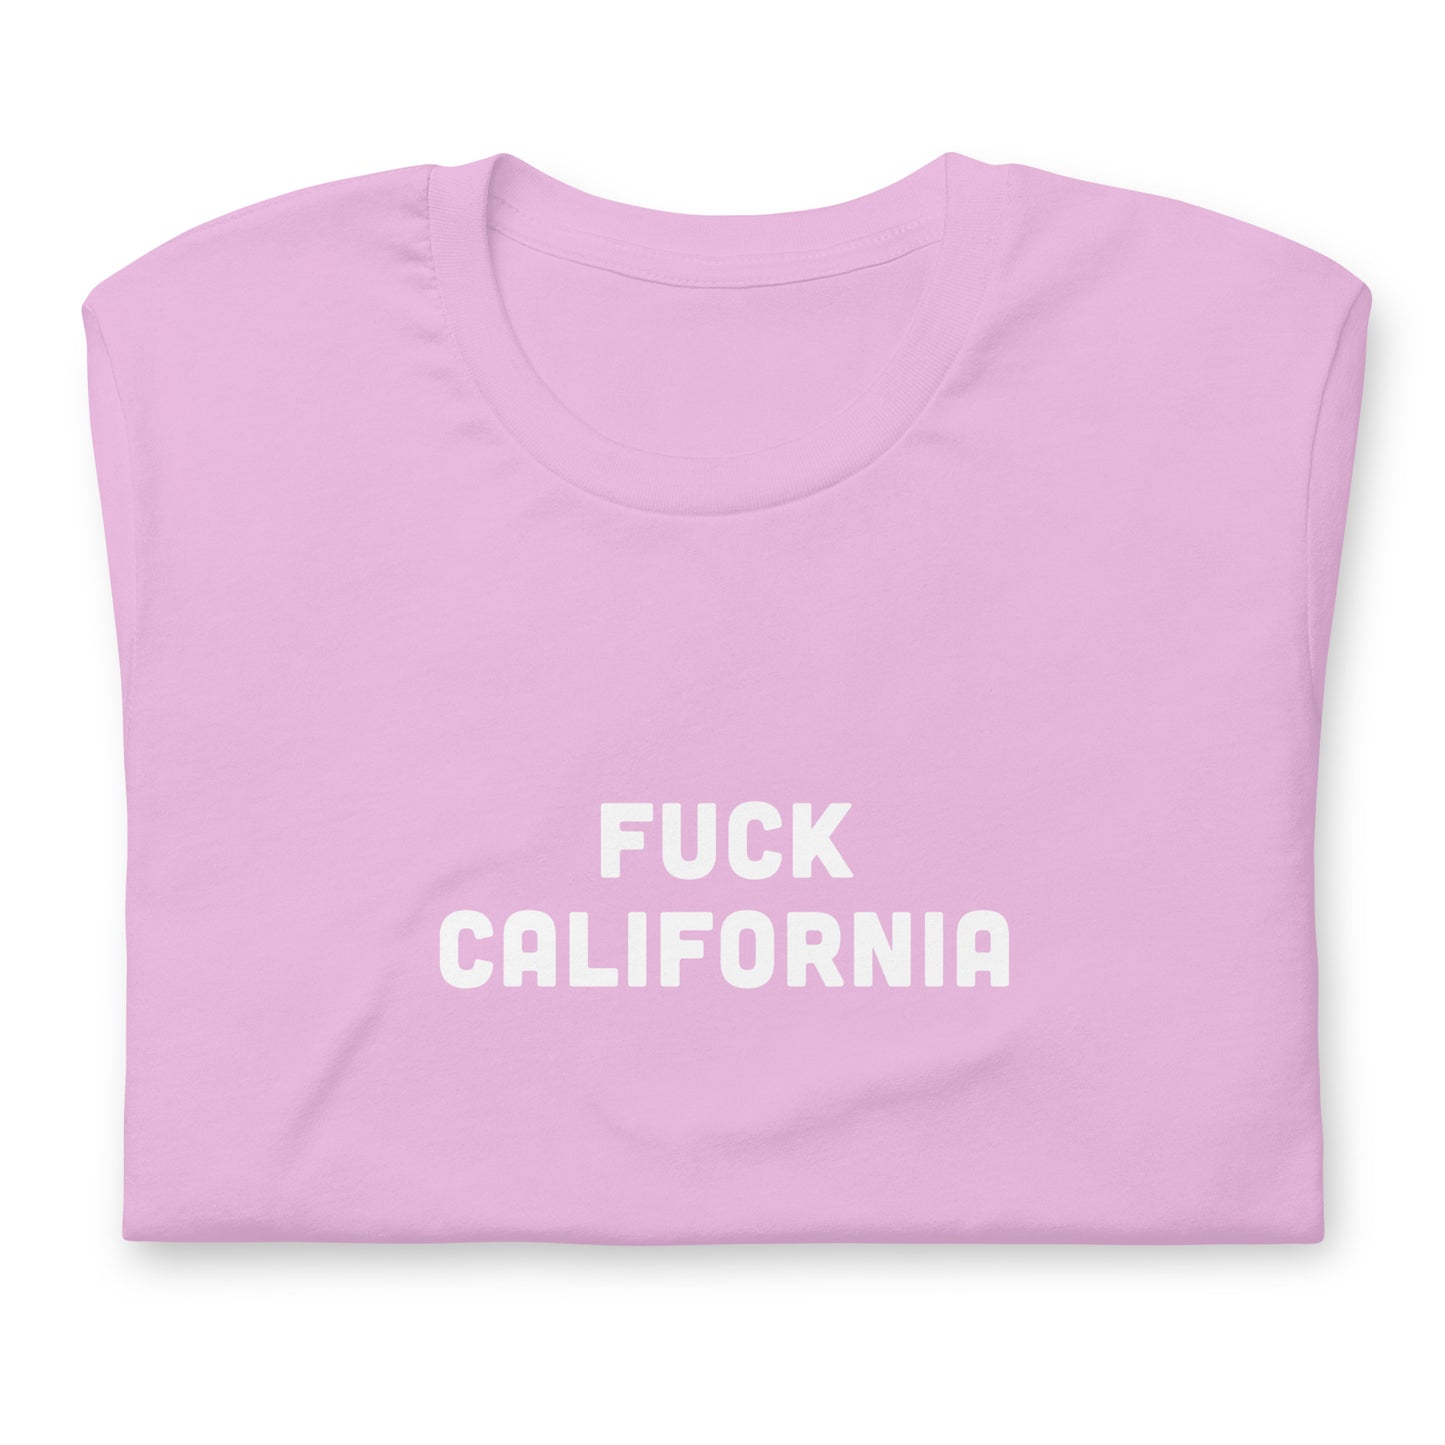 Fuck California T-Shirt Size 2XL Color Forest